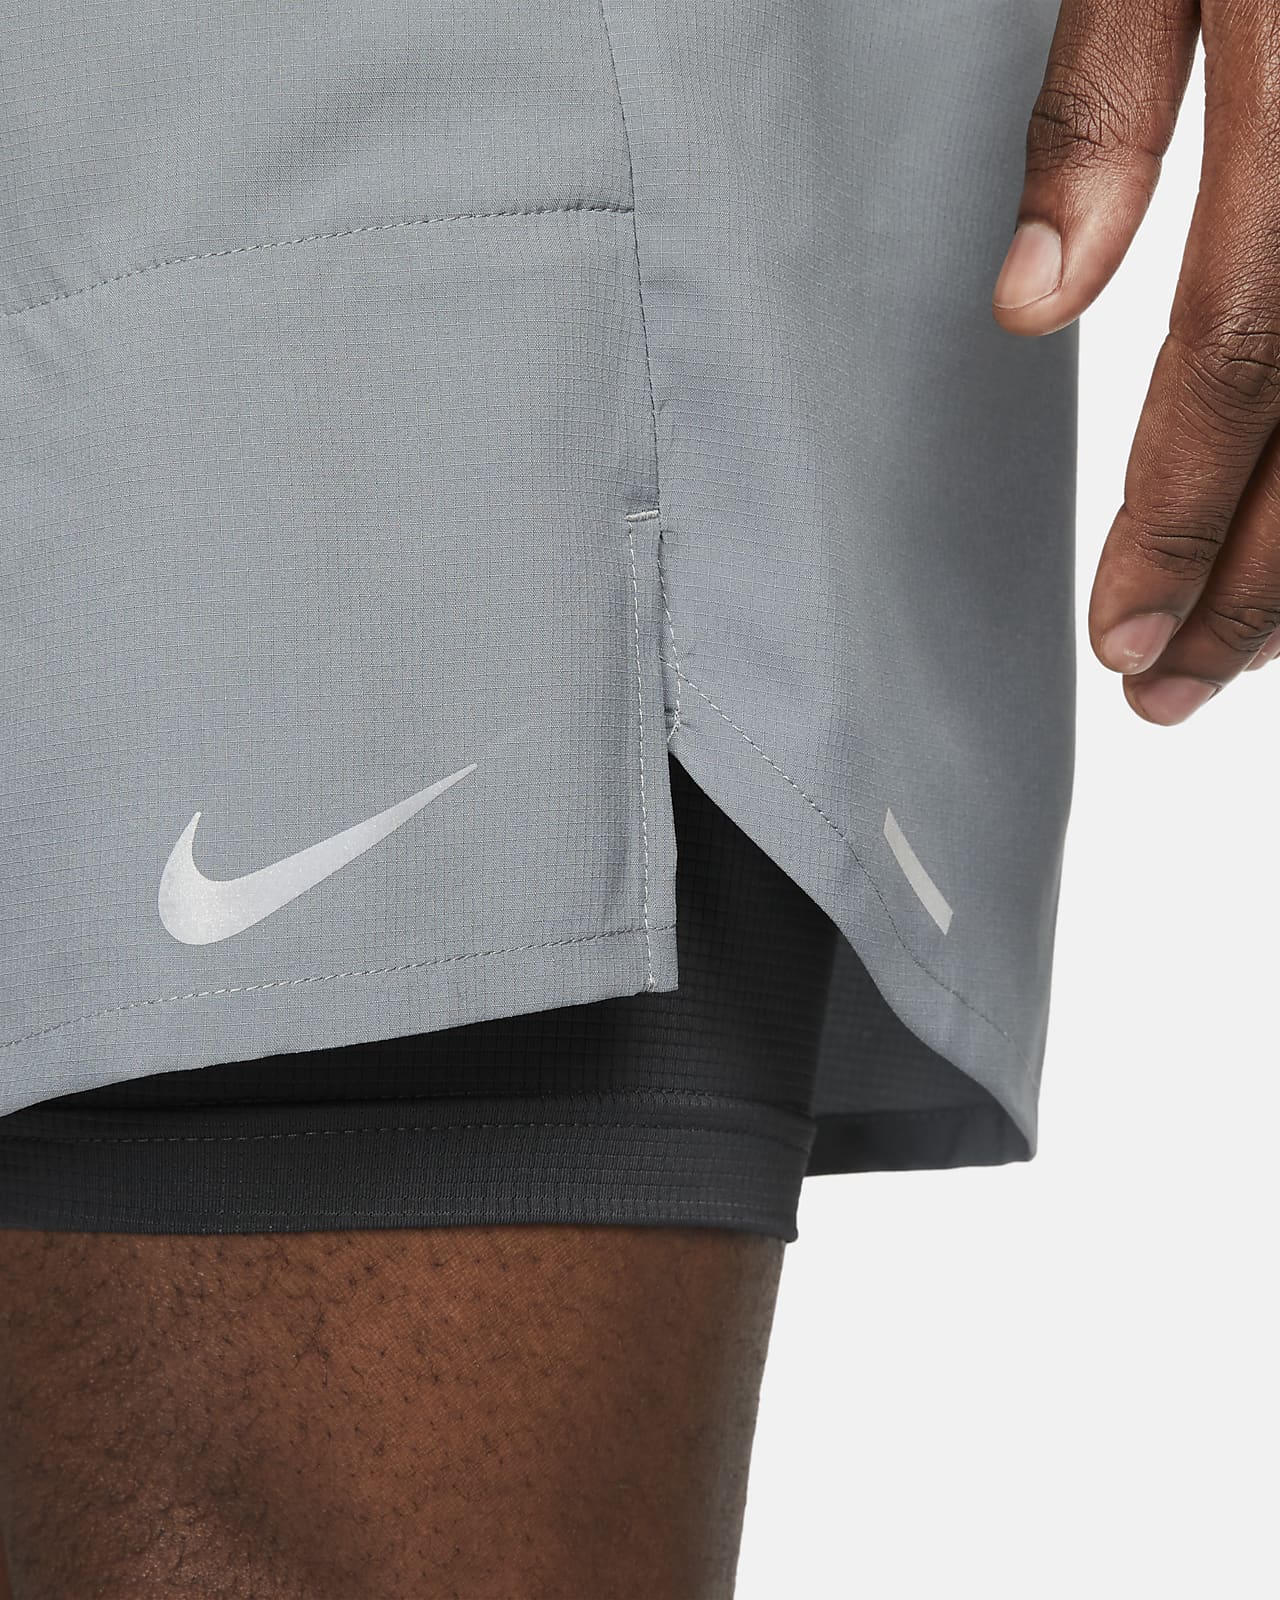 Nike Dri-FIT Stride 2-in-1 Shorts review: the best running shorts